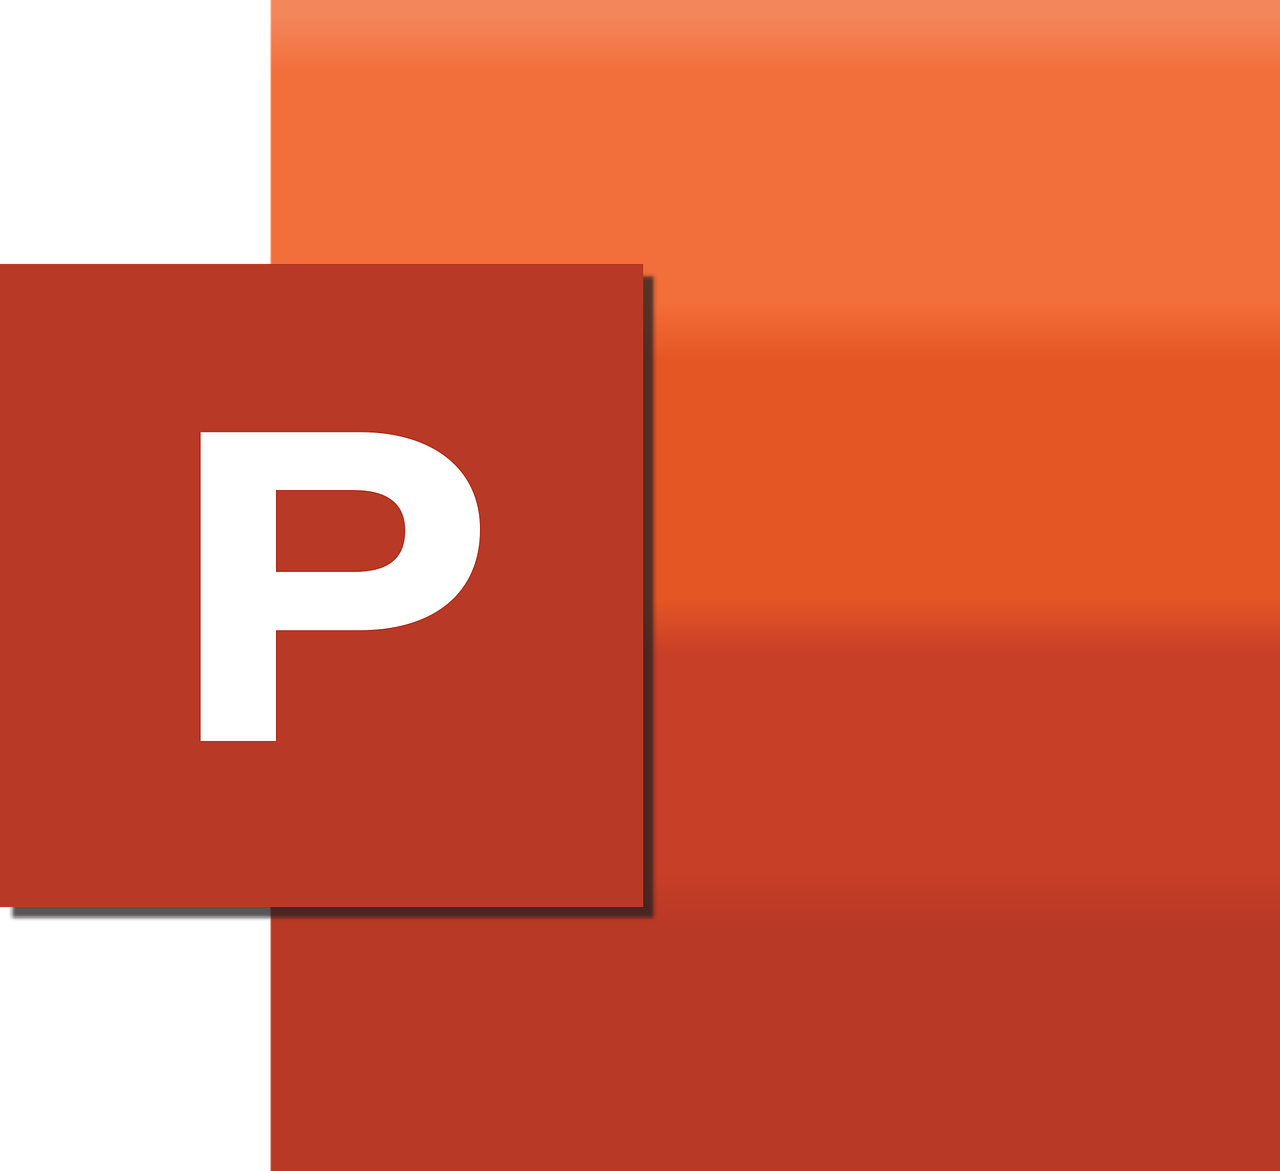 Powerpoint is one of the presentation software with over 35 million PowerPoint presentations created every day and presented to an audience of 500 million people